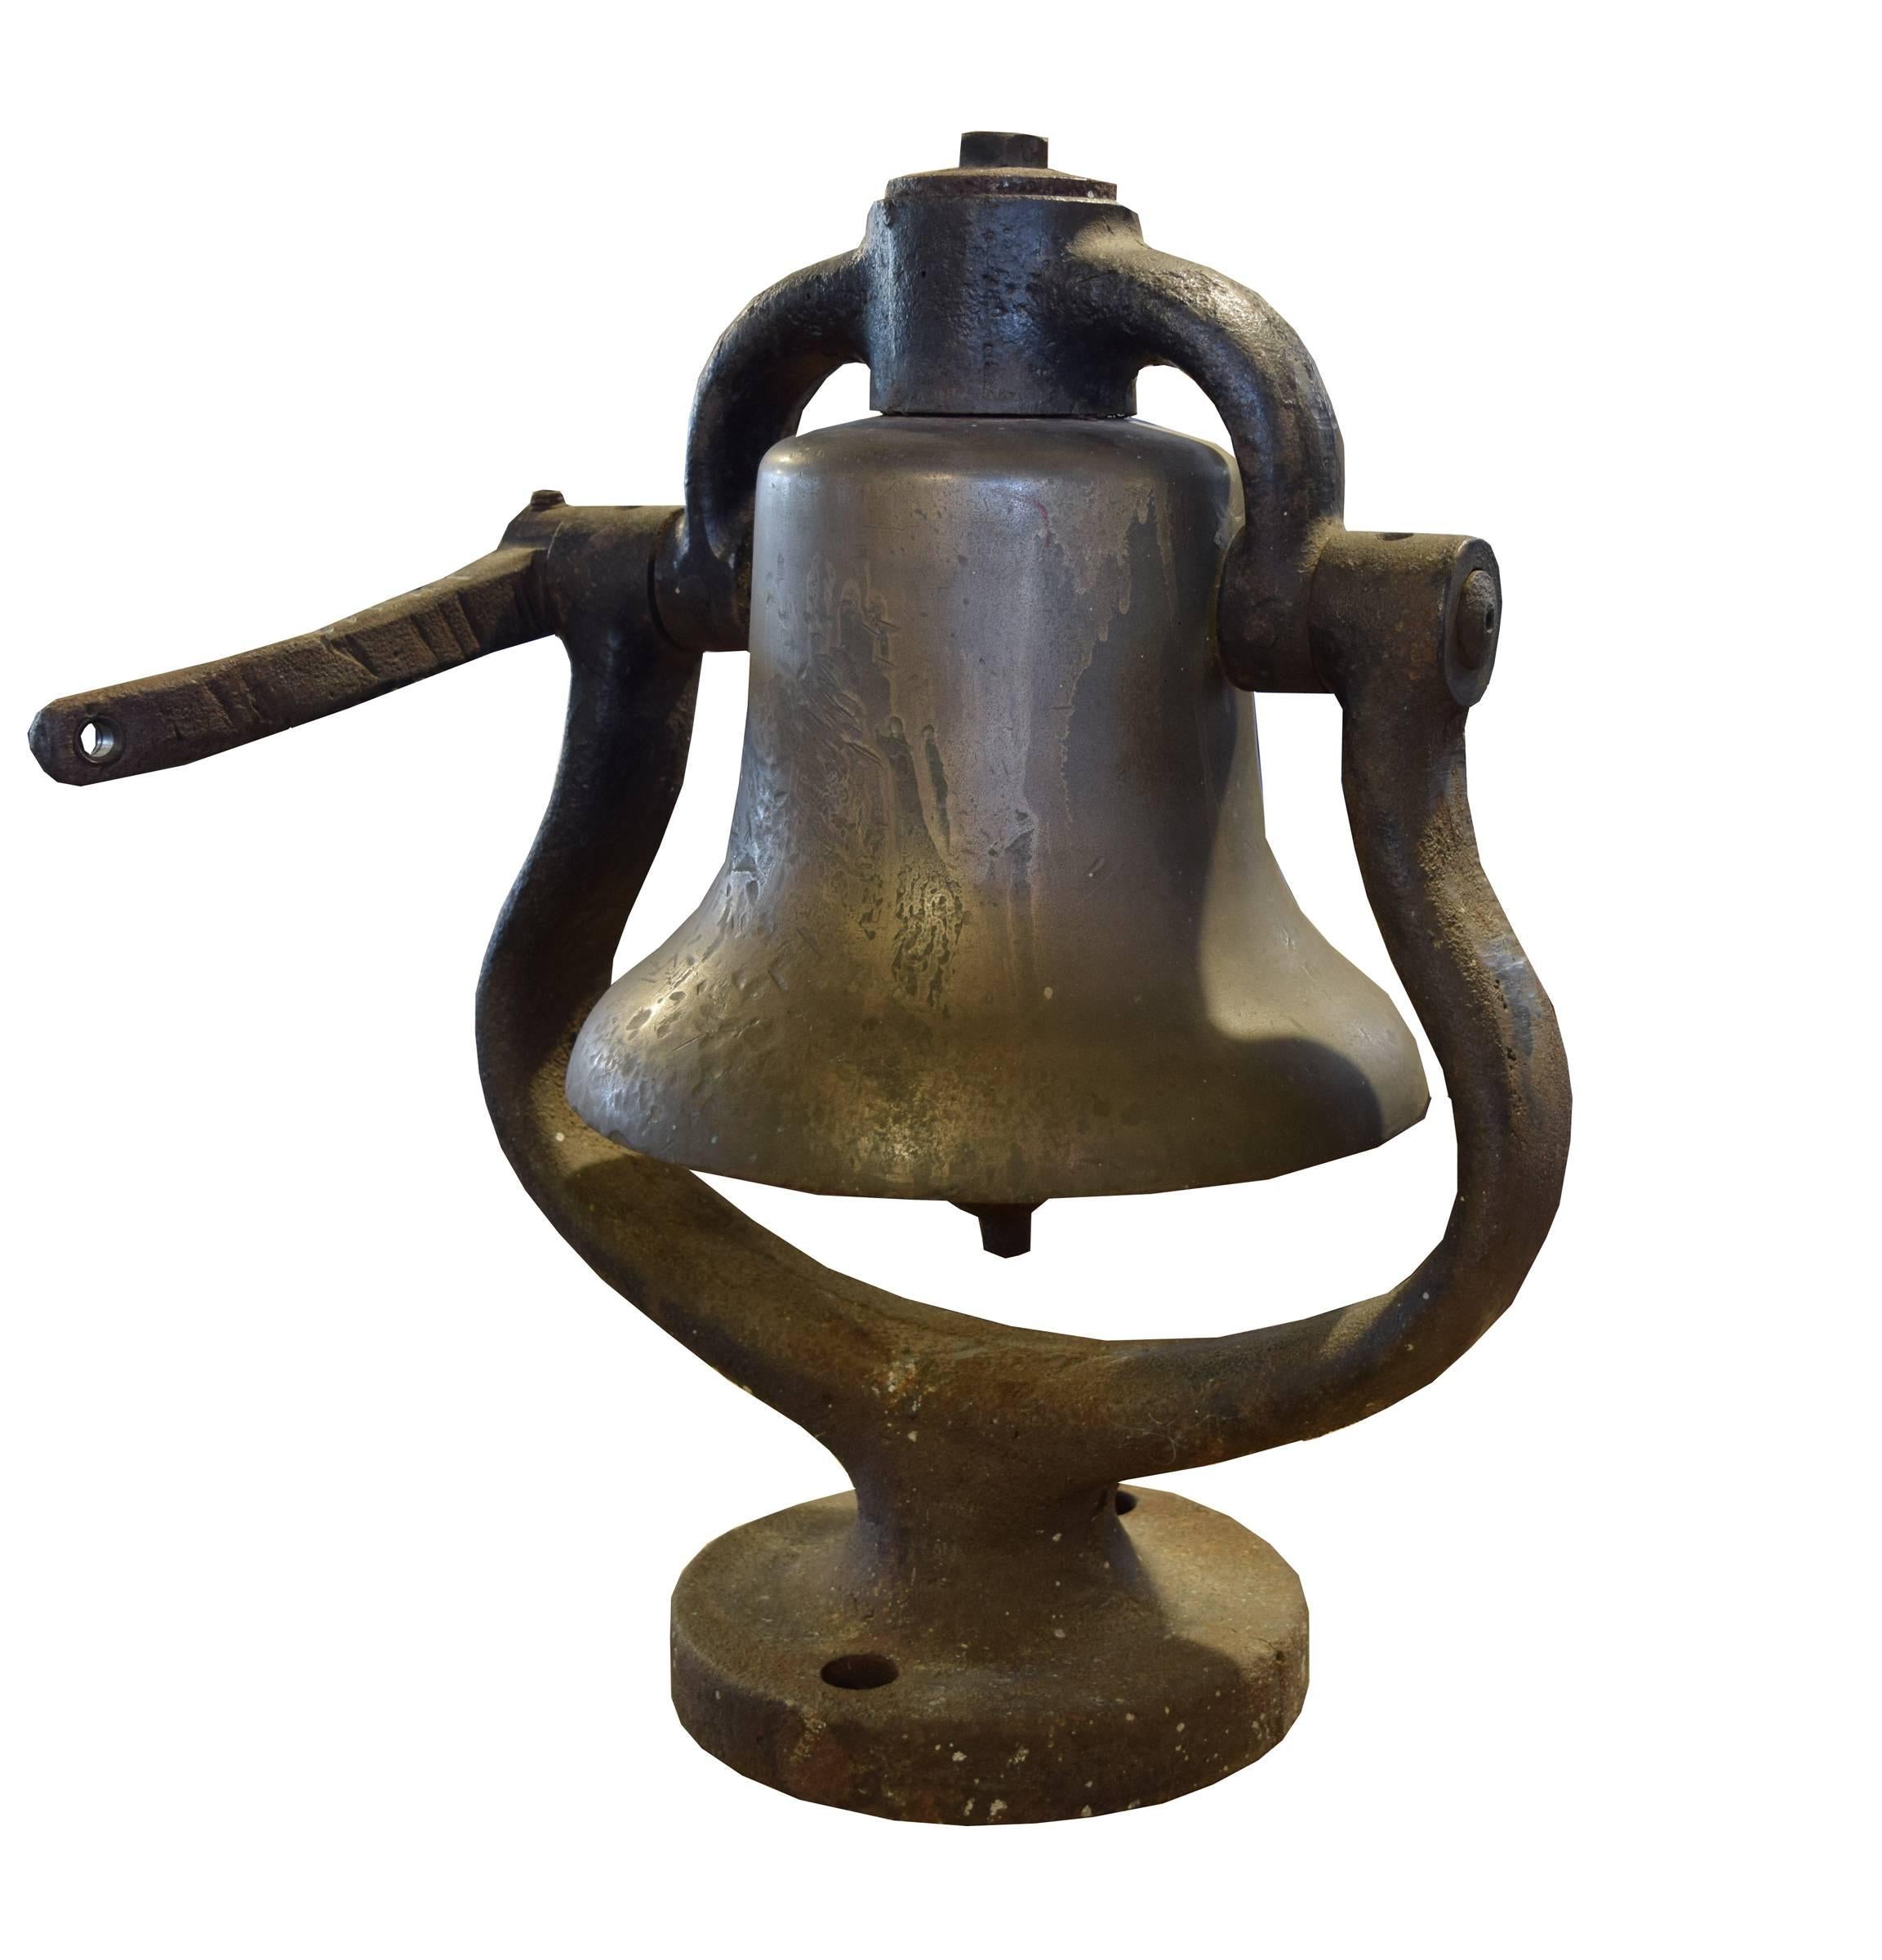 American bronze locomotive bell with iron surround housing cradle and clapper, circa 1900.